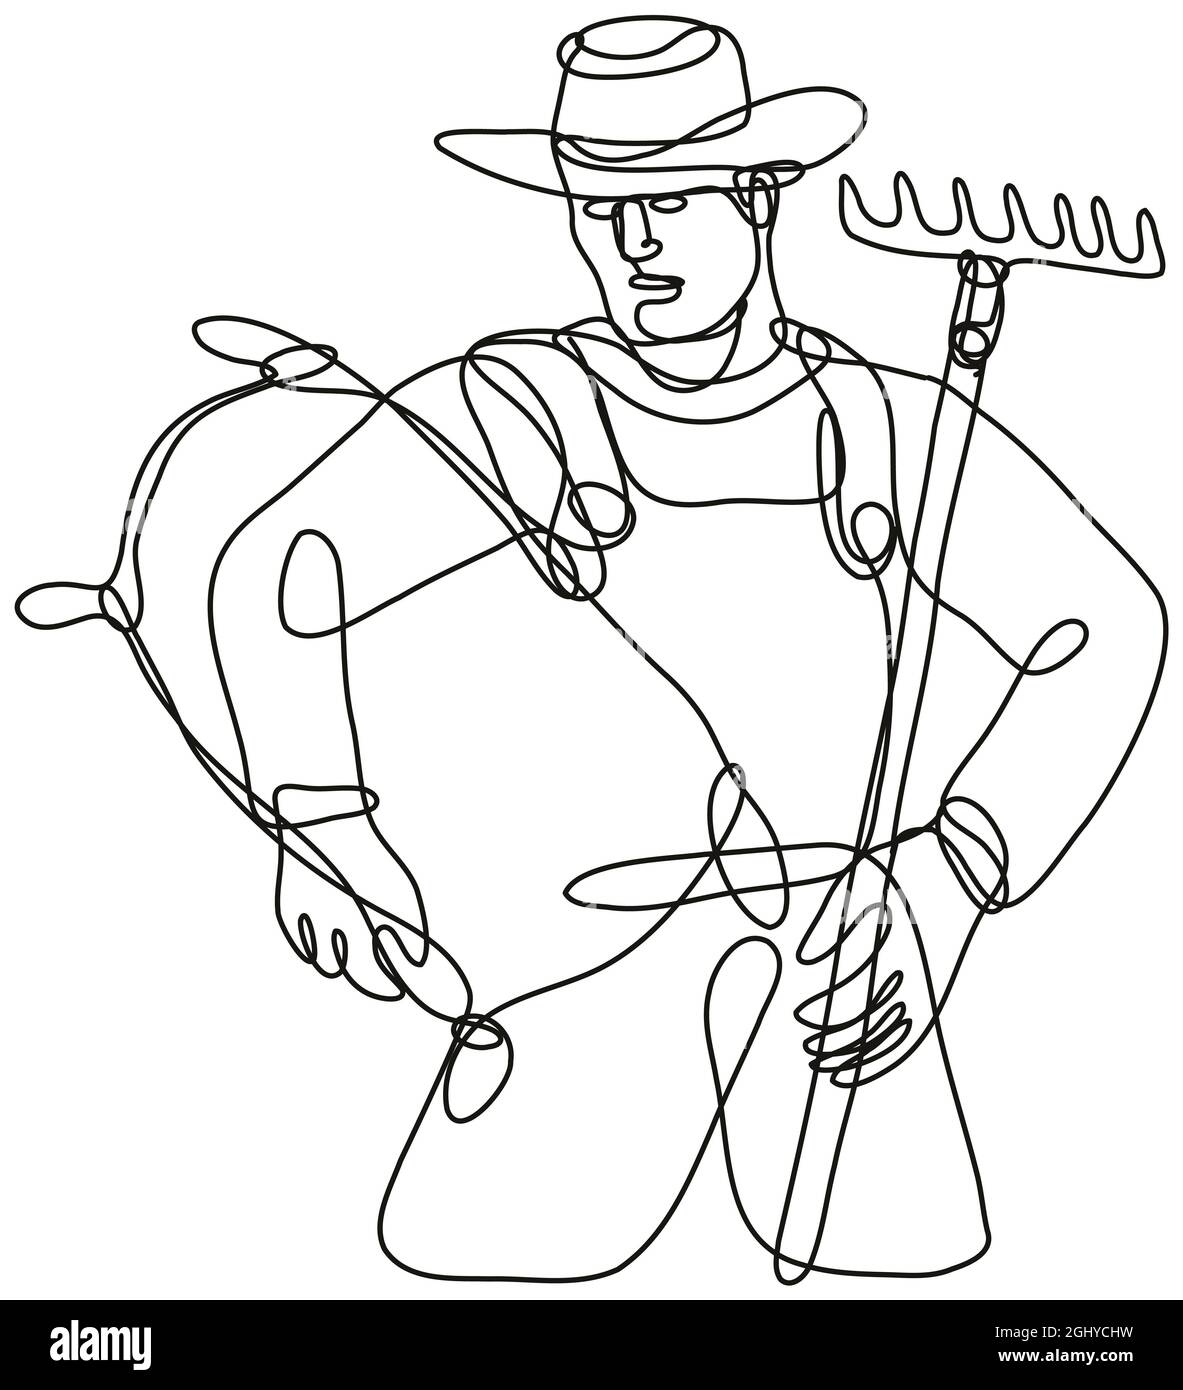 Organic Farmer with Rake and Carrying Sack Continuous Line Drawing Stock Photo